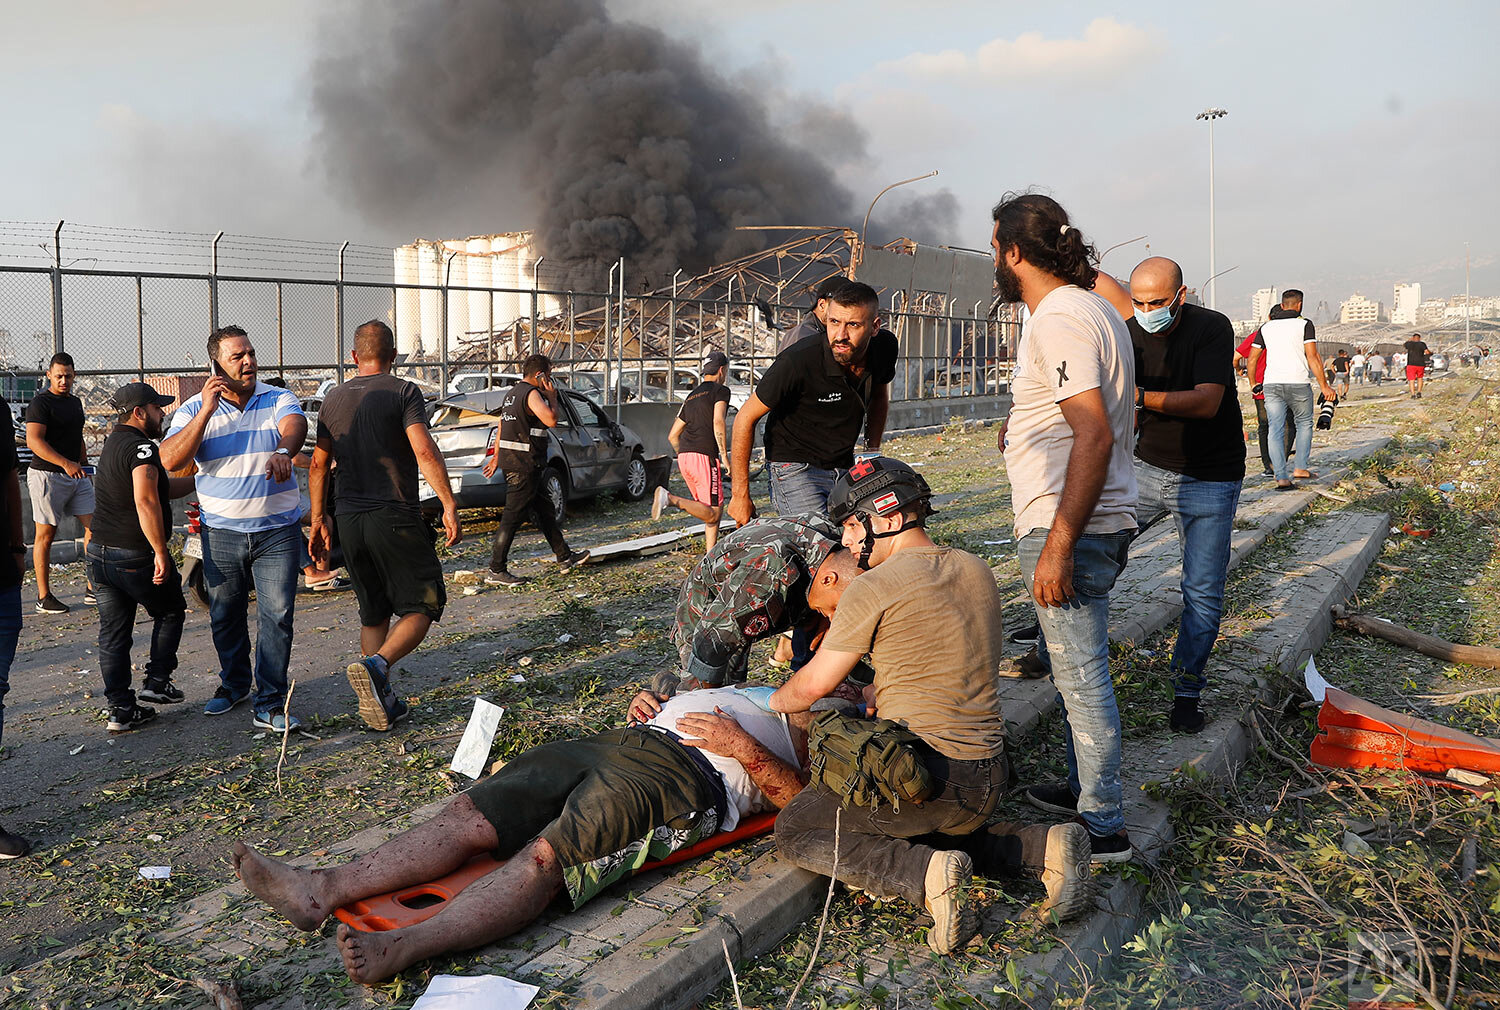  Rescue workers help an injured man at the explosion scene that hit the seaport of Beirut, Lebanon, Tuesday, Aug. 4, 2020. (AP Photo/Hussein Malla) 